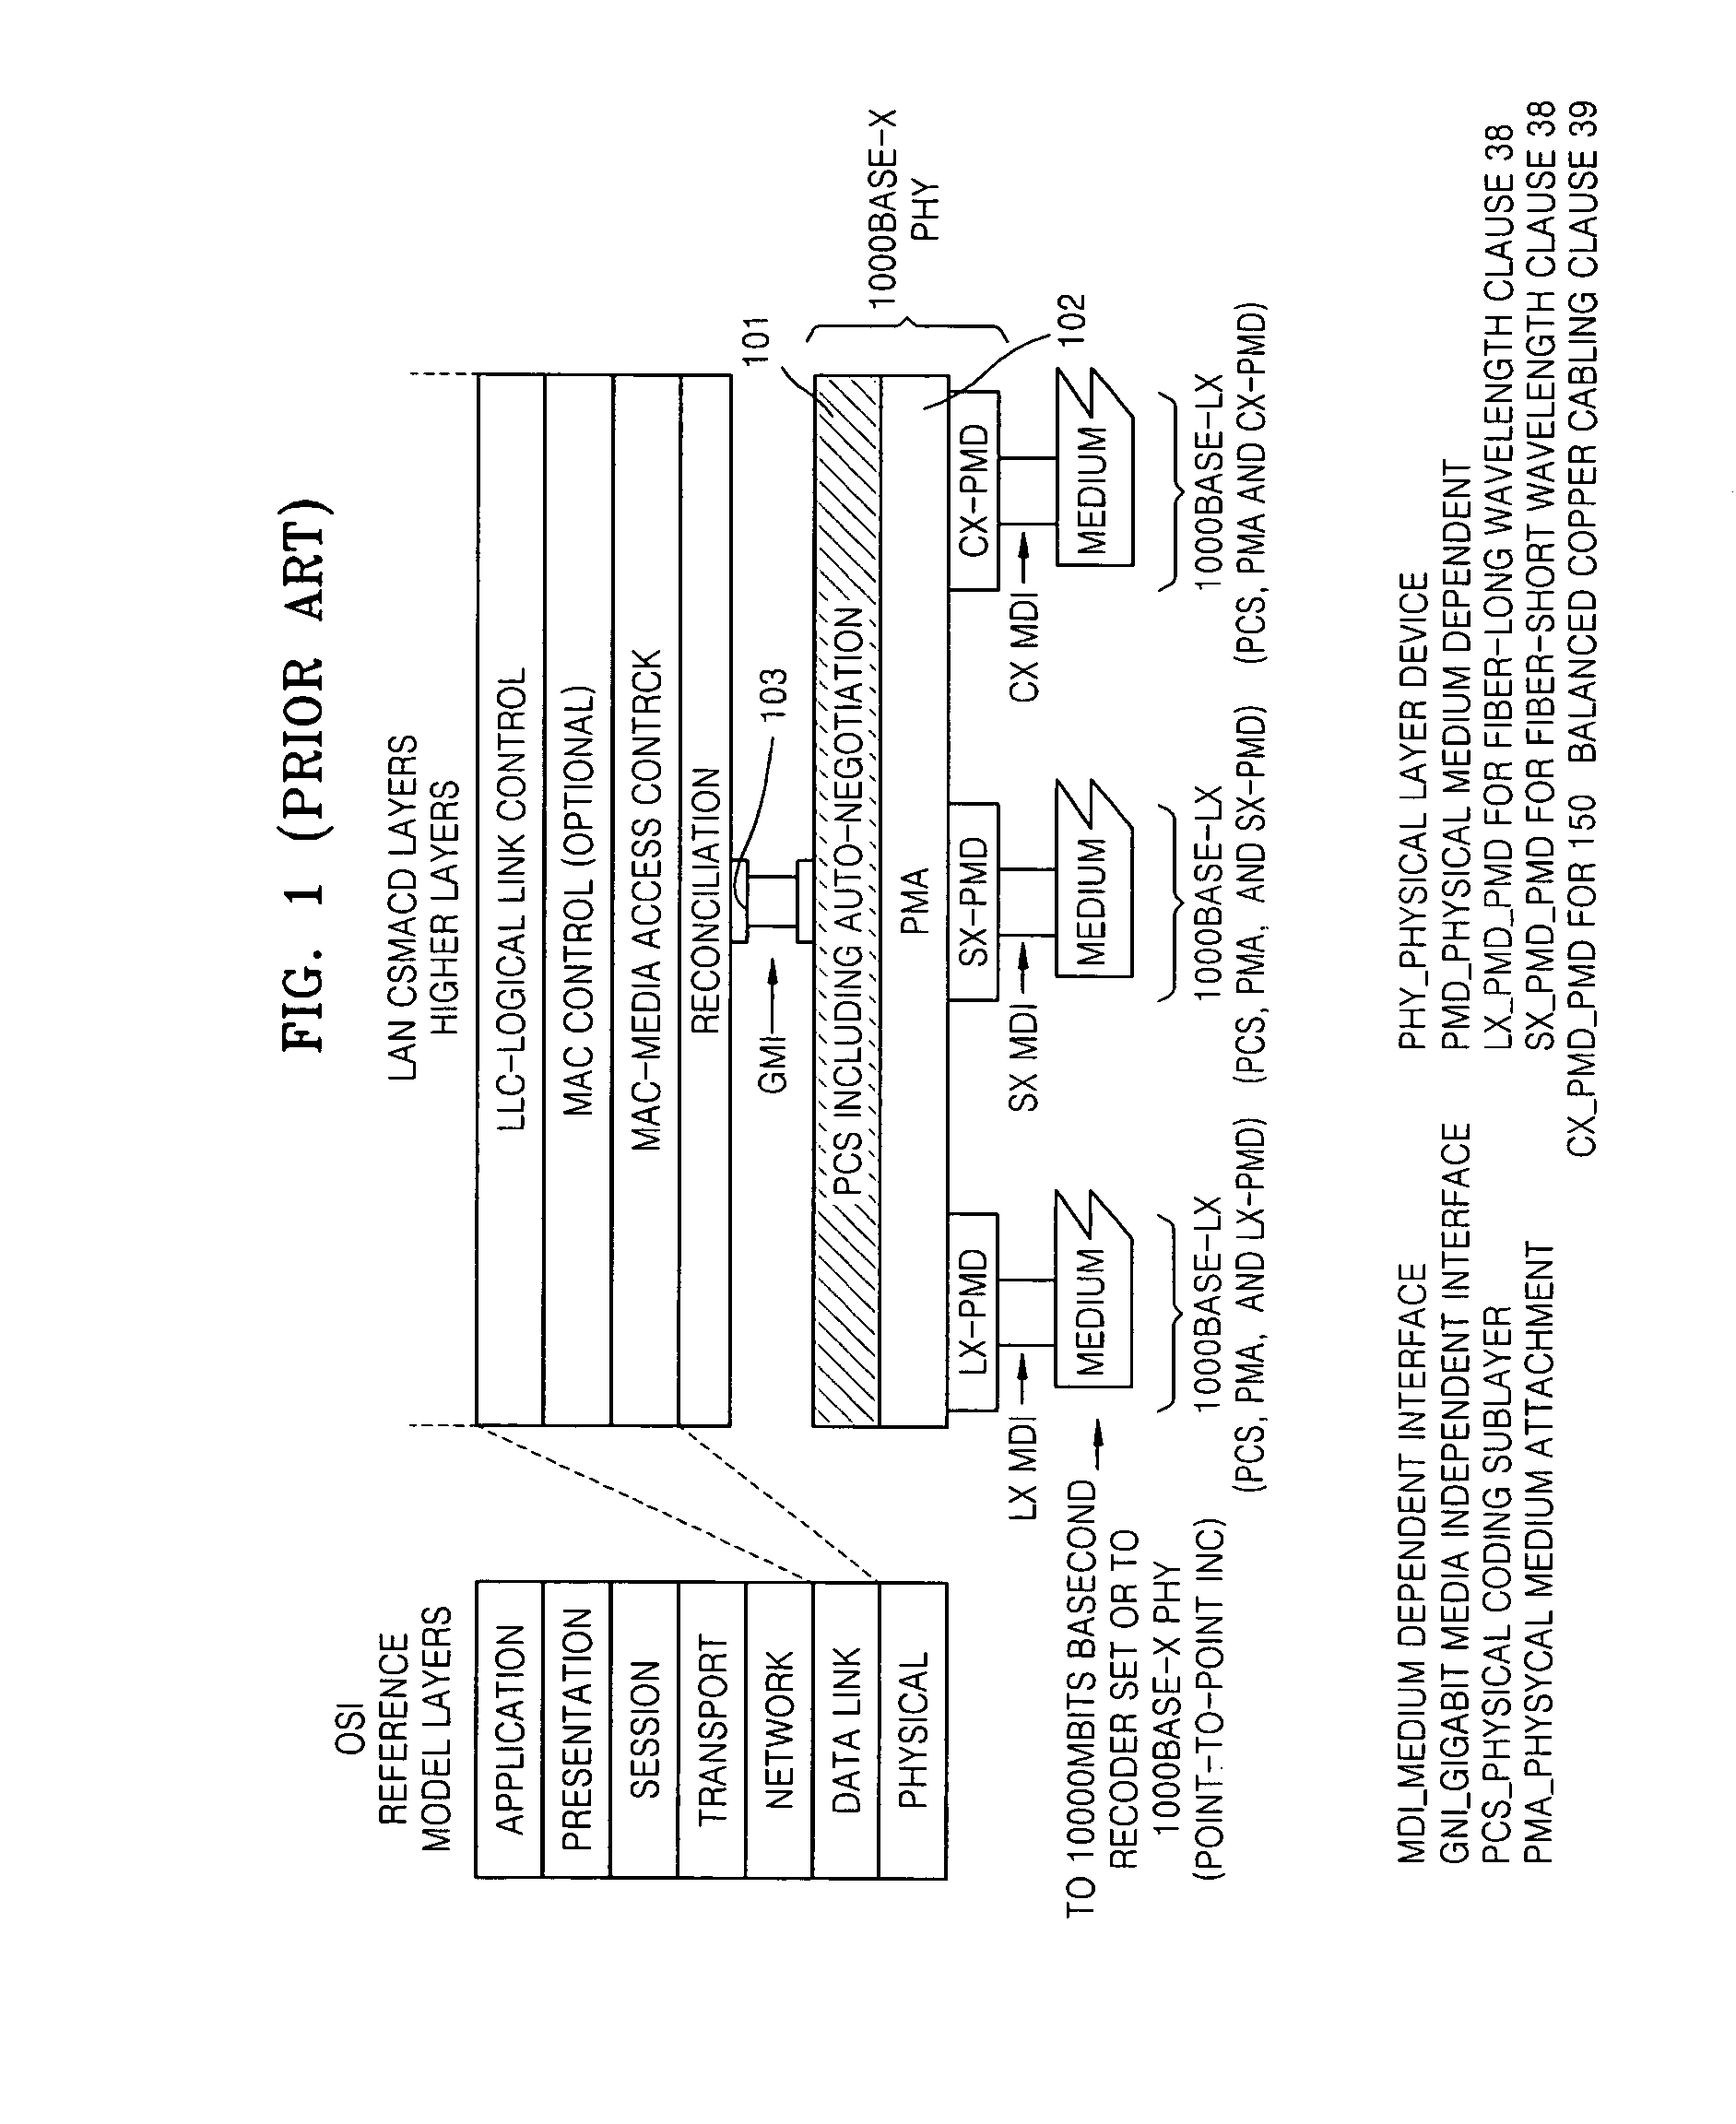 Physical coding sublayer apparatus and Ethernet layer architecture for network-based tunable wavelength passive optical network system